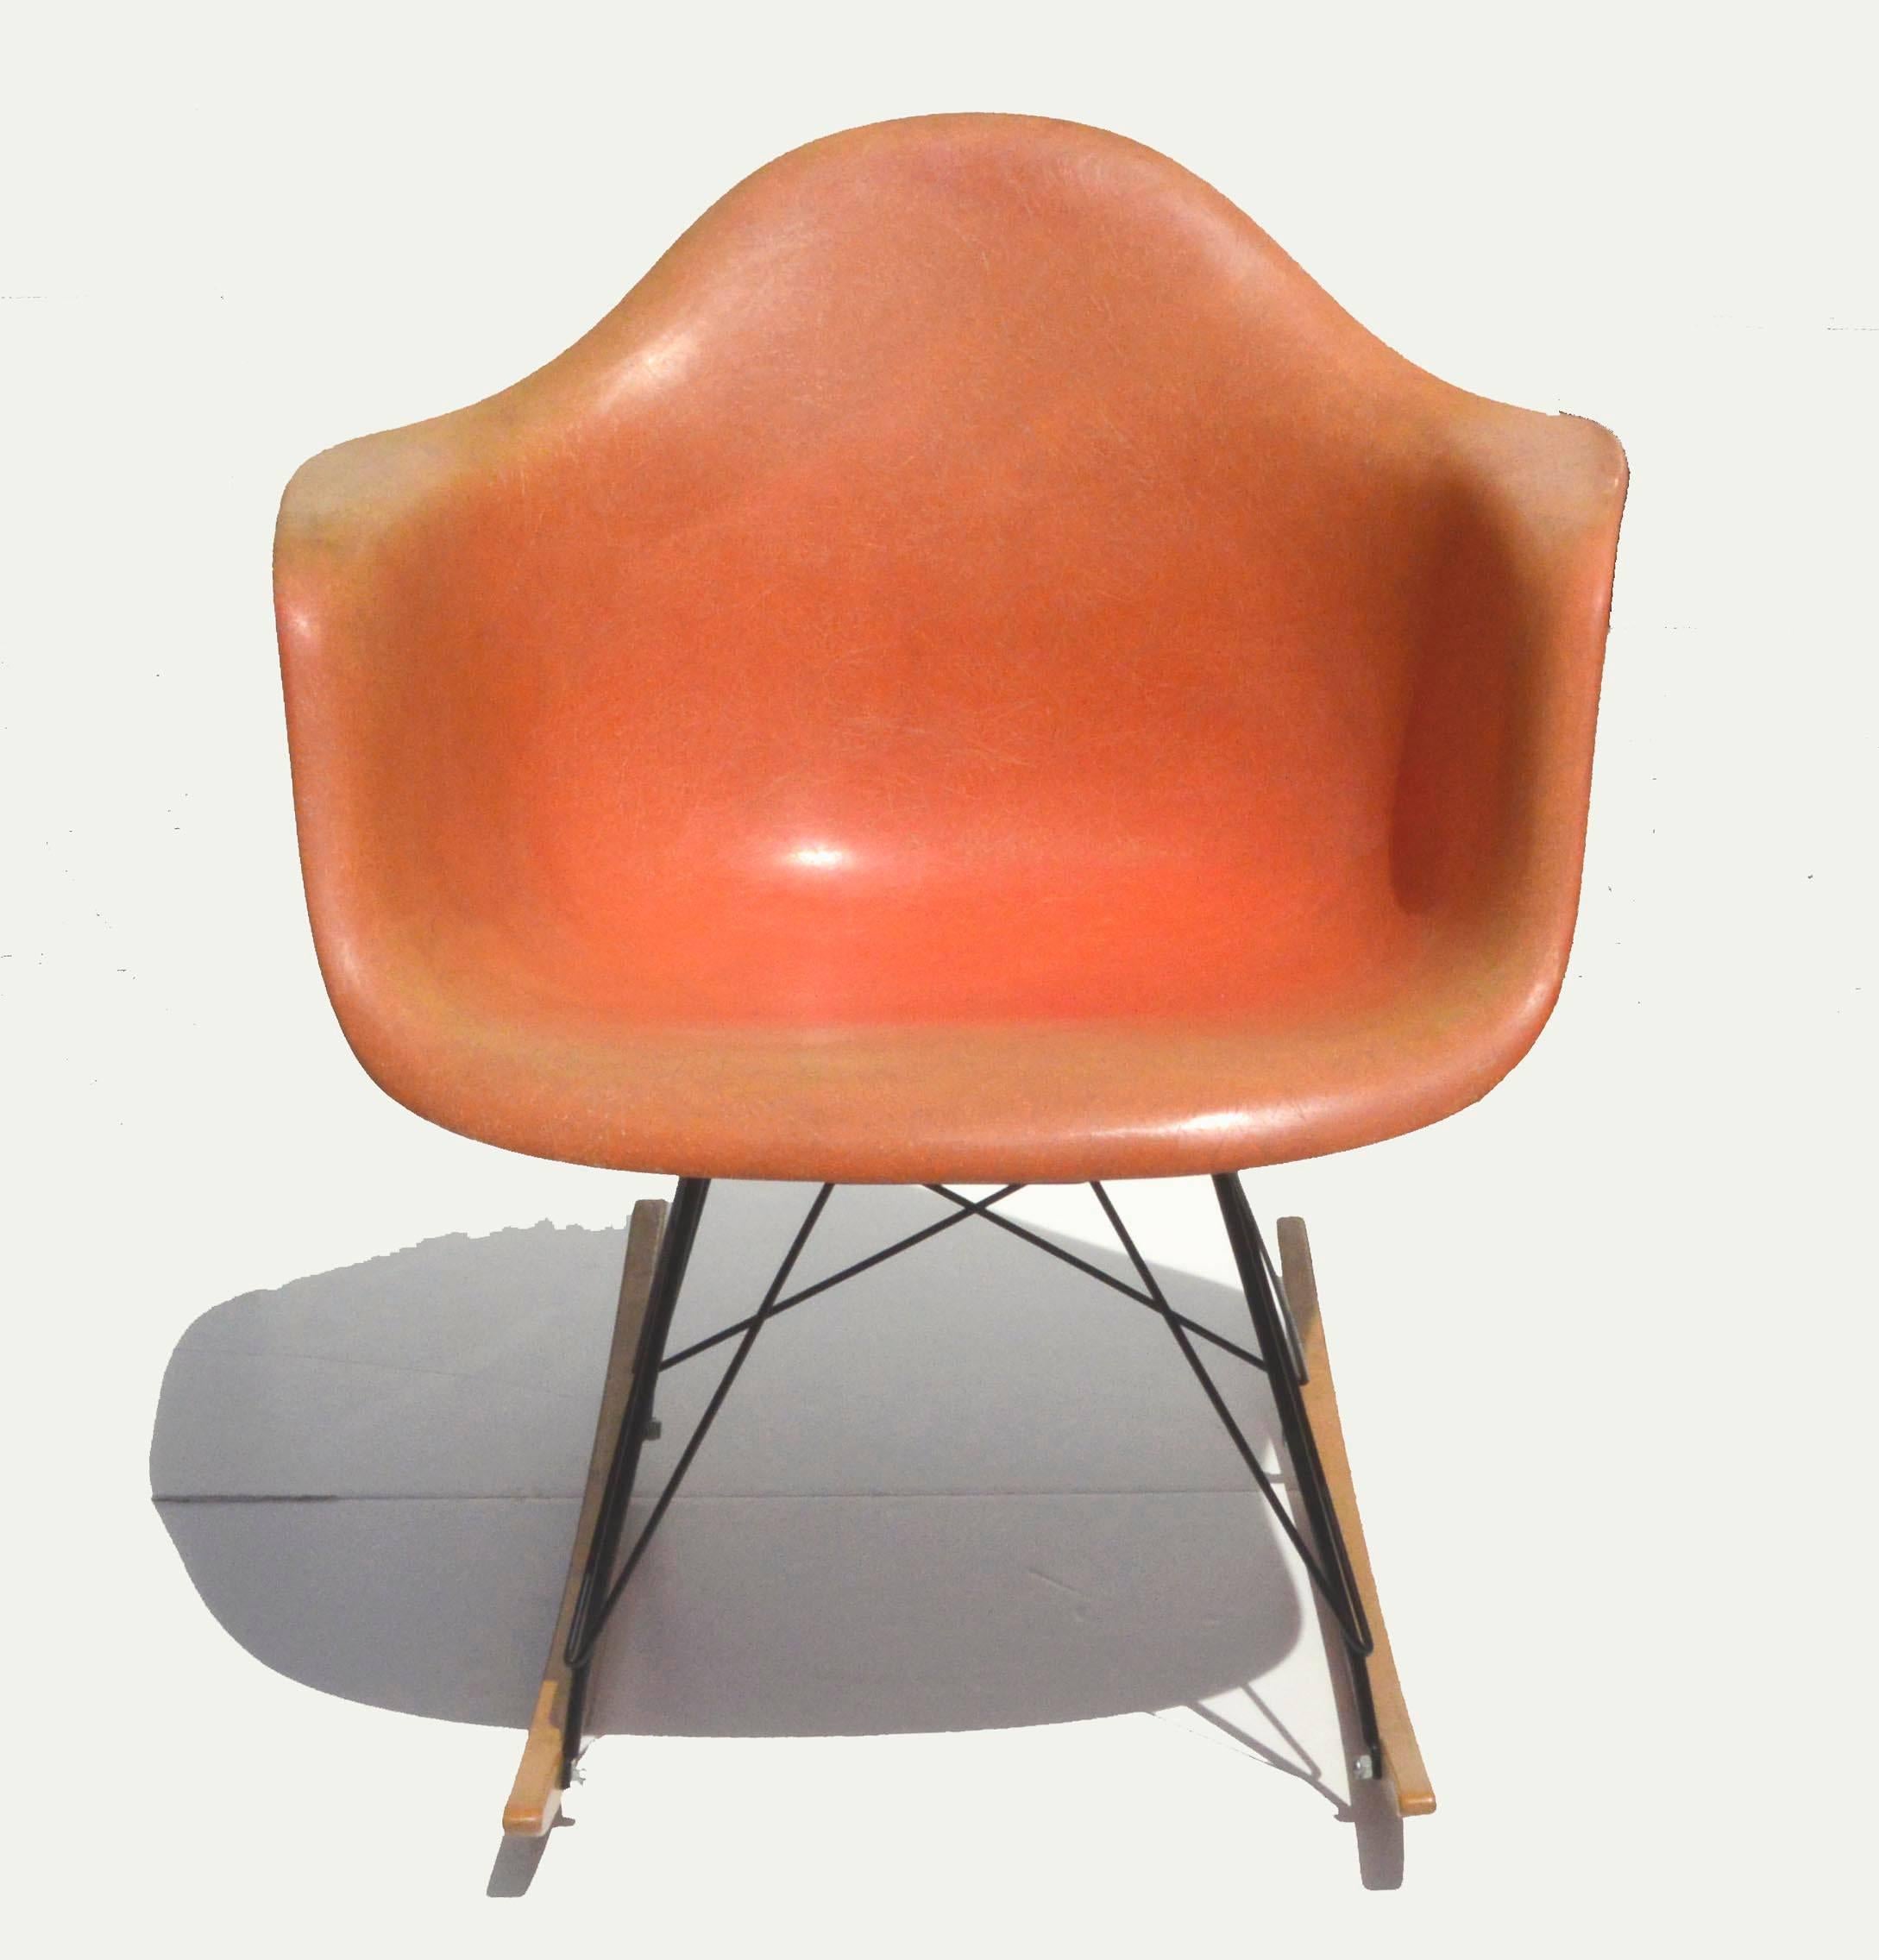 Gorgeous iconic salmon-orange fiberglass molded plastic rocking chair with black enamel base and birch rocking struts, circa 1960s. Second generation Charles and Ray Eames RAR rocker with the large shock mounts but no rope edge. Fading has given it